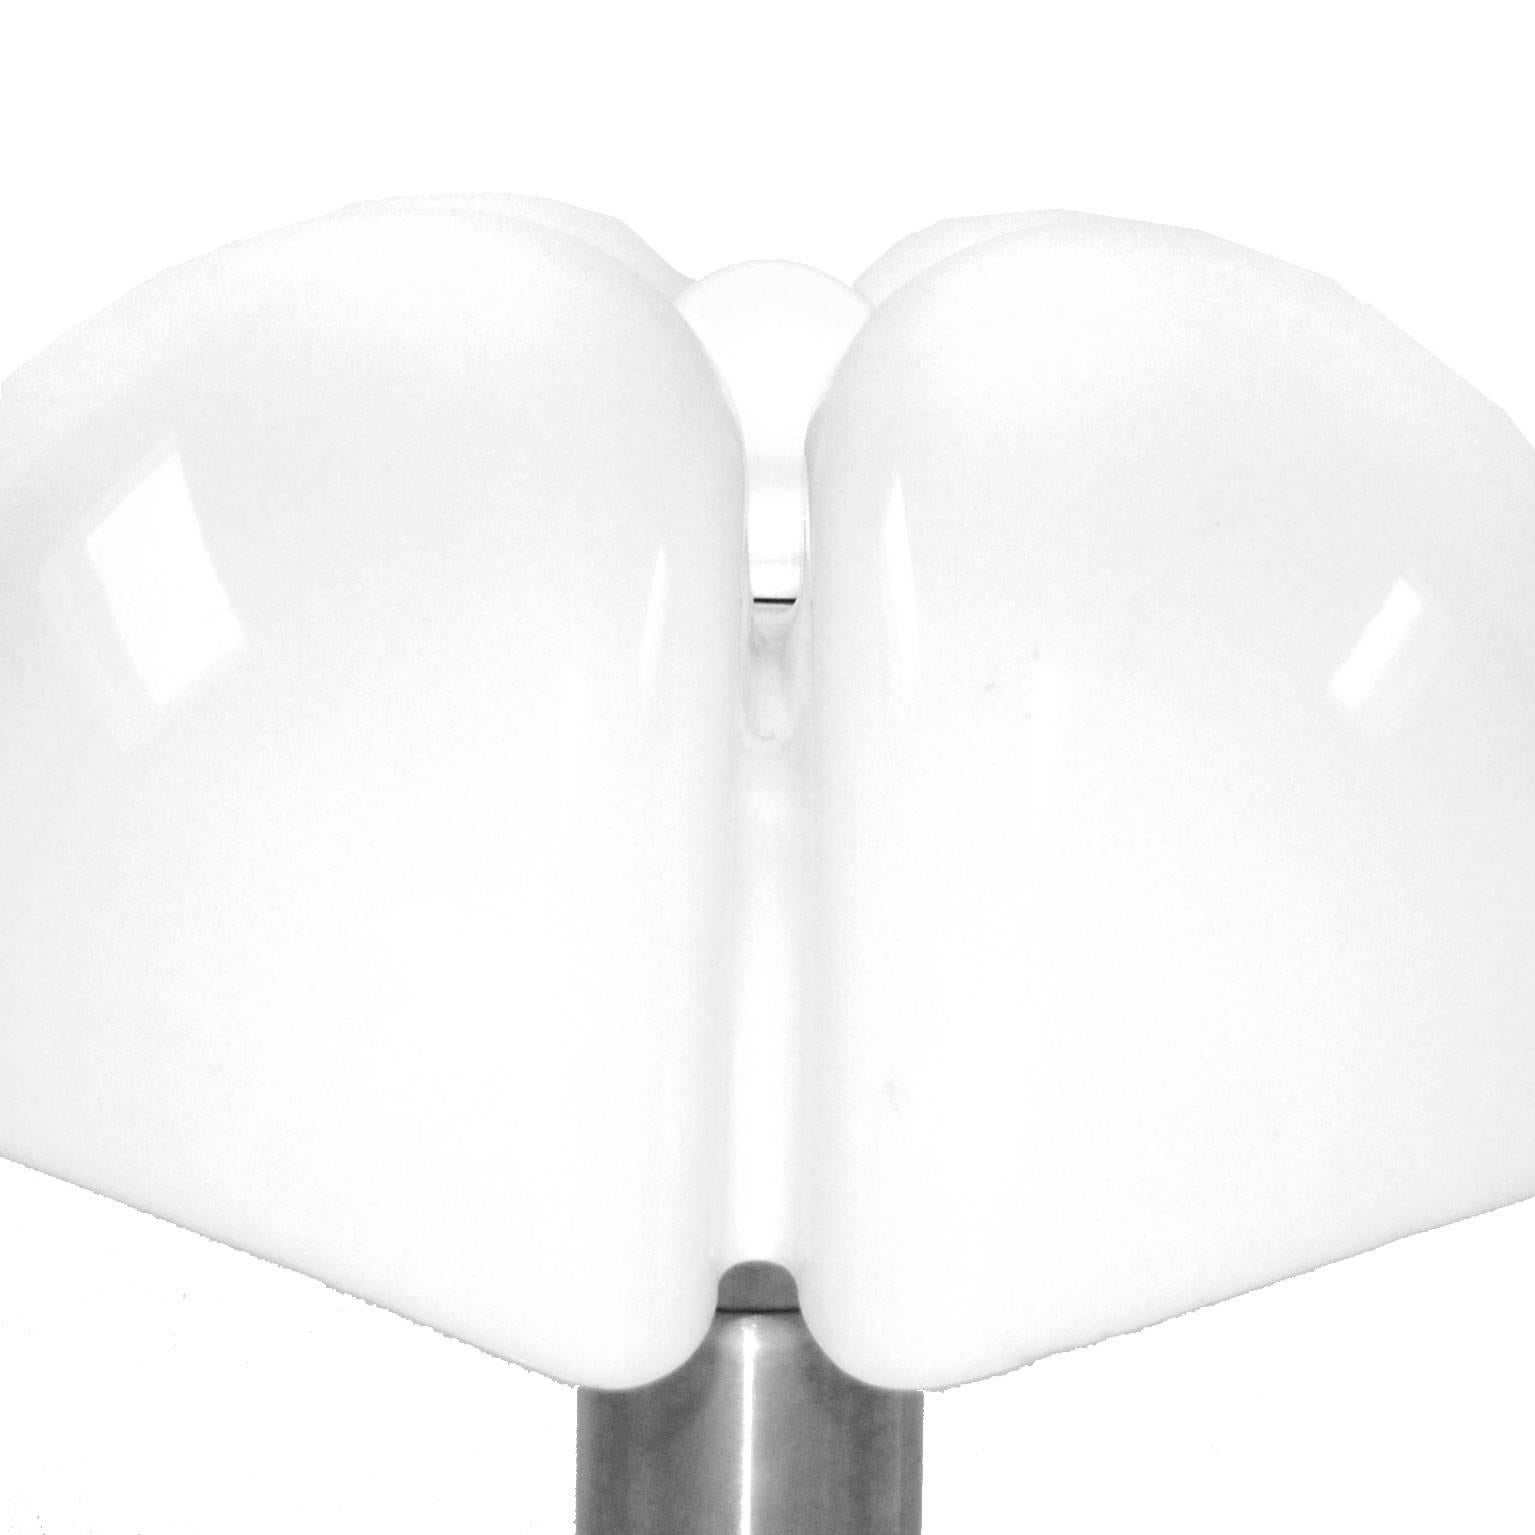 Pipistrello table lamp by Gae Aulenti. Regulable structure made in white lacquer metal and steel with shade in fiberglass. 